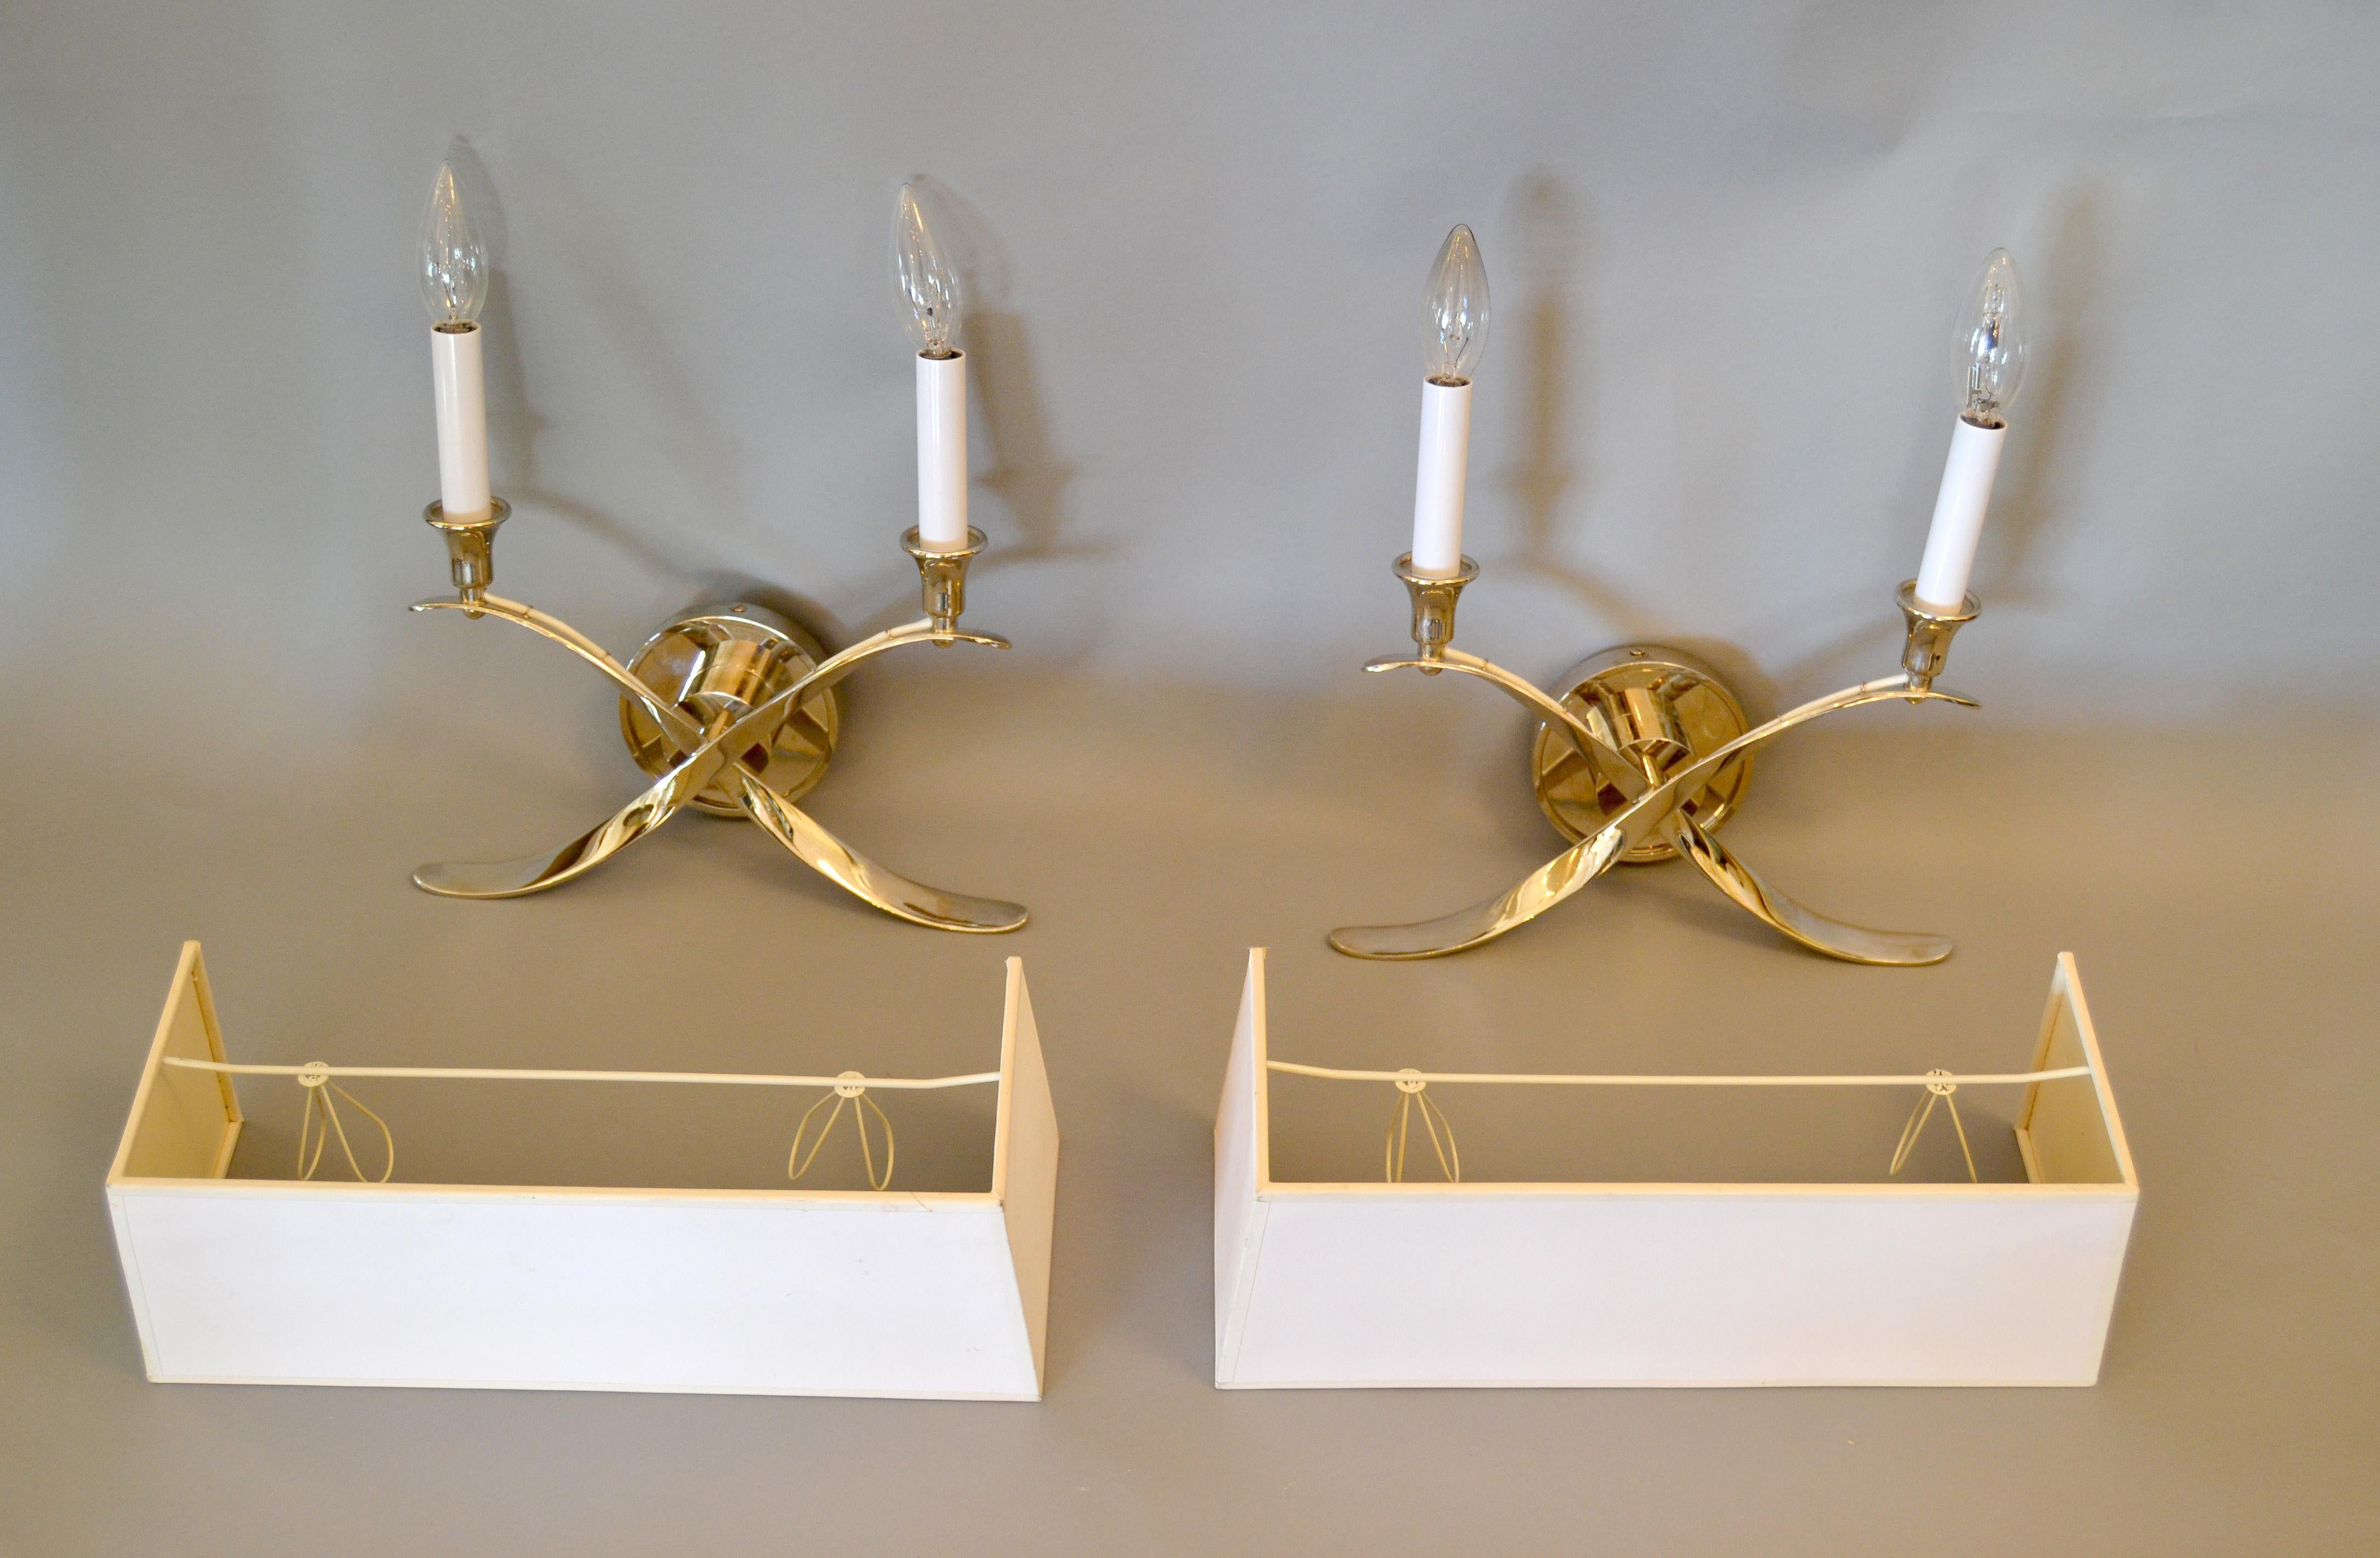 Elegant Crossed Scrollwork Stainless Steel Double Sconces and Paper Shades, Pair (amerikanisch)